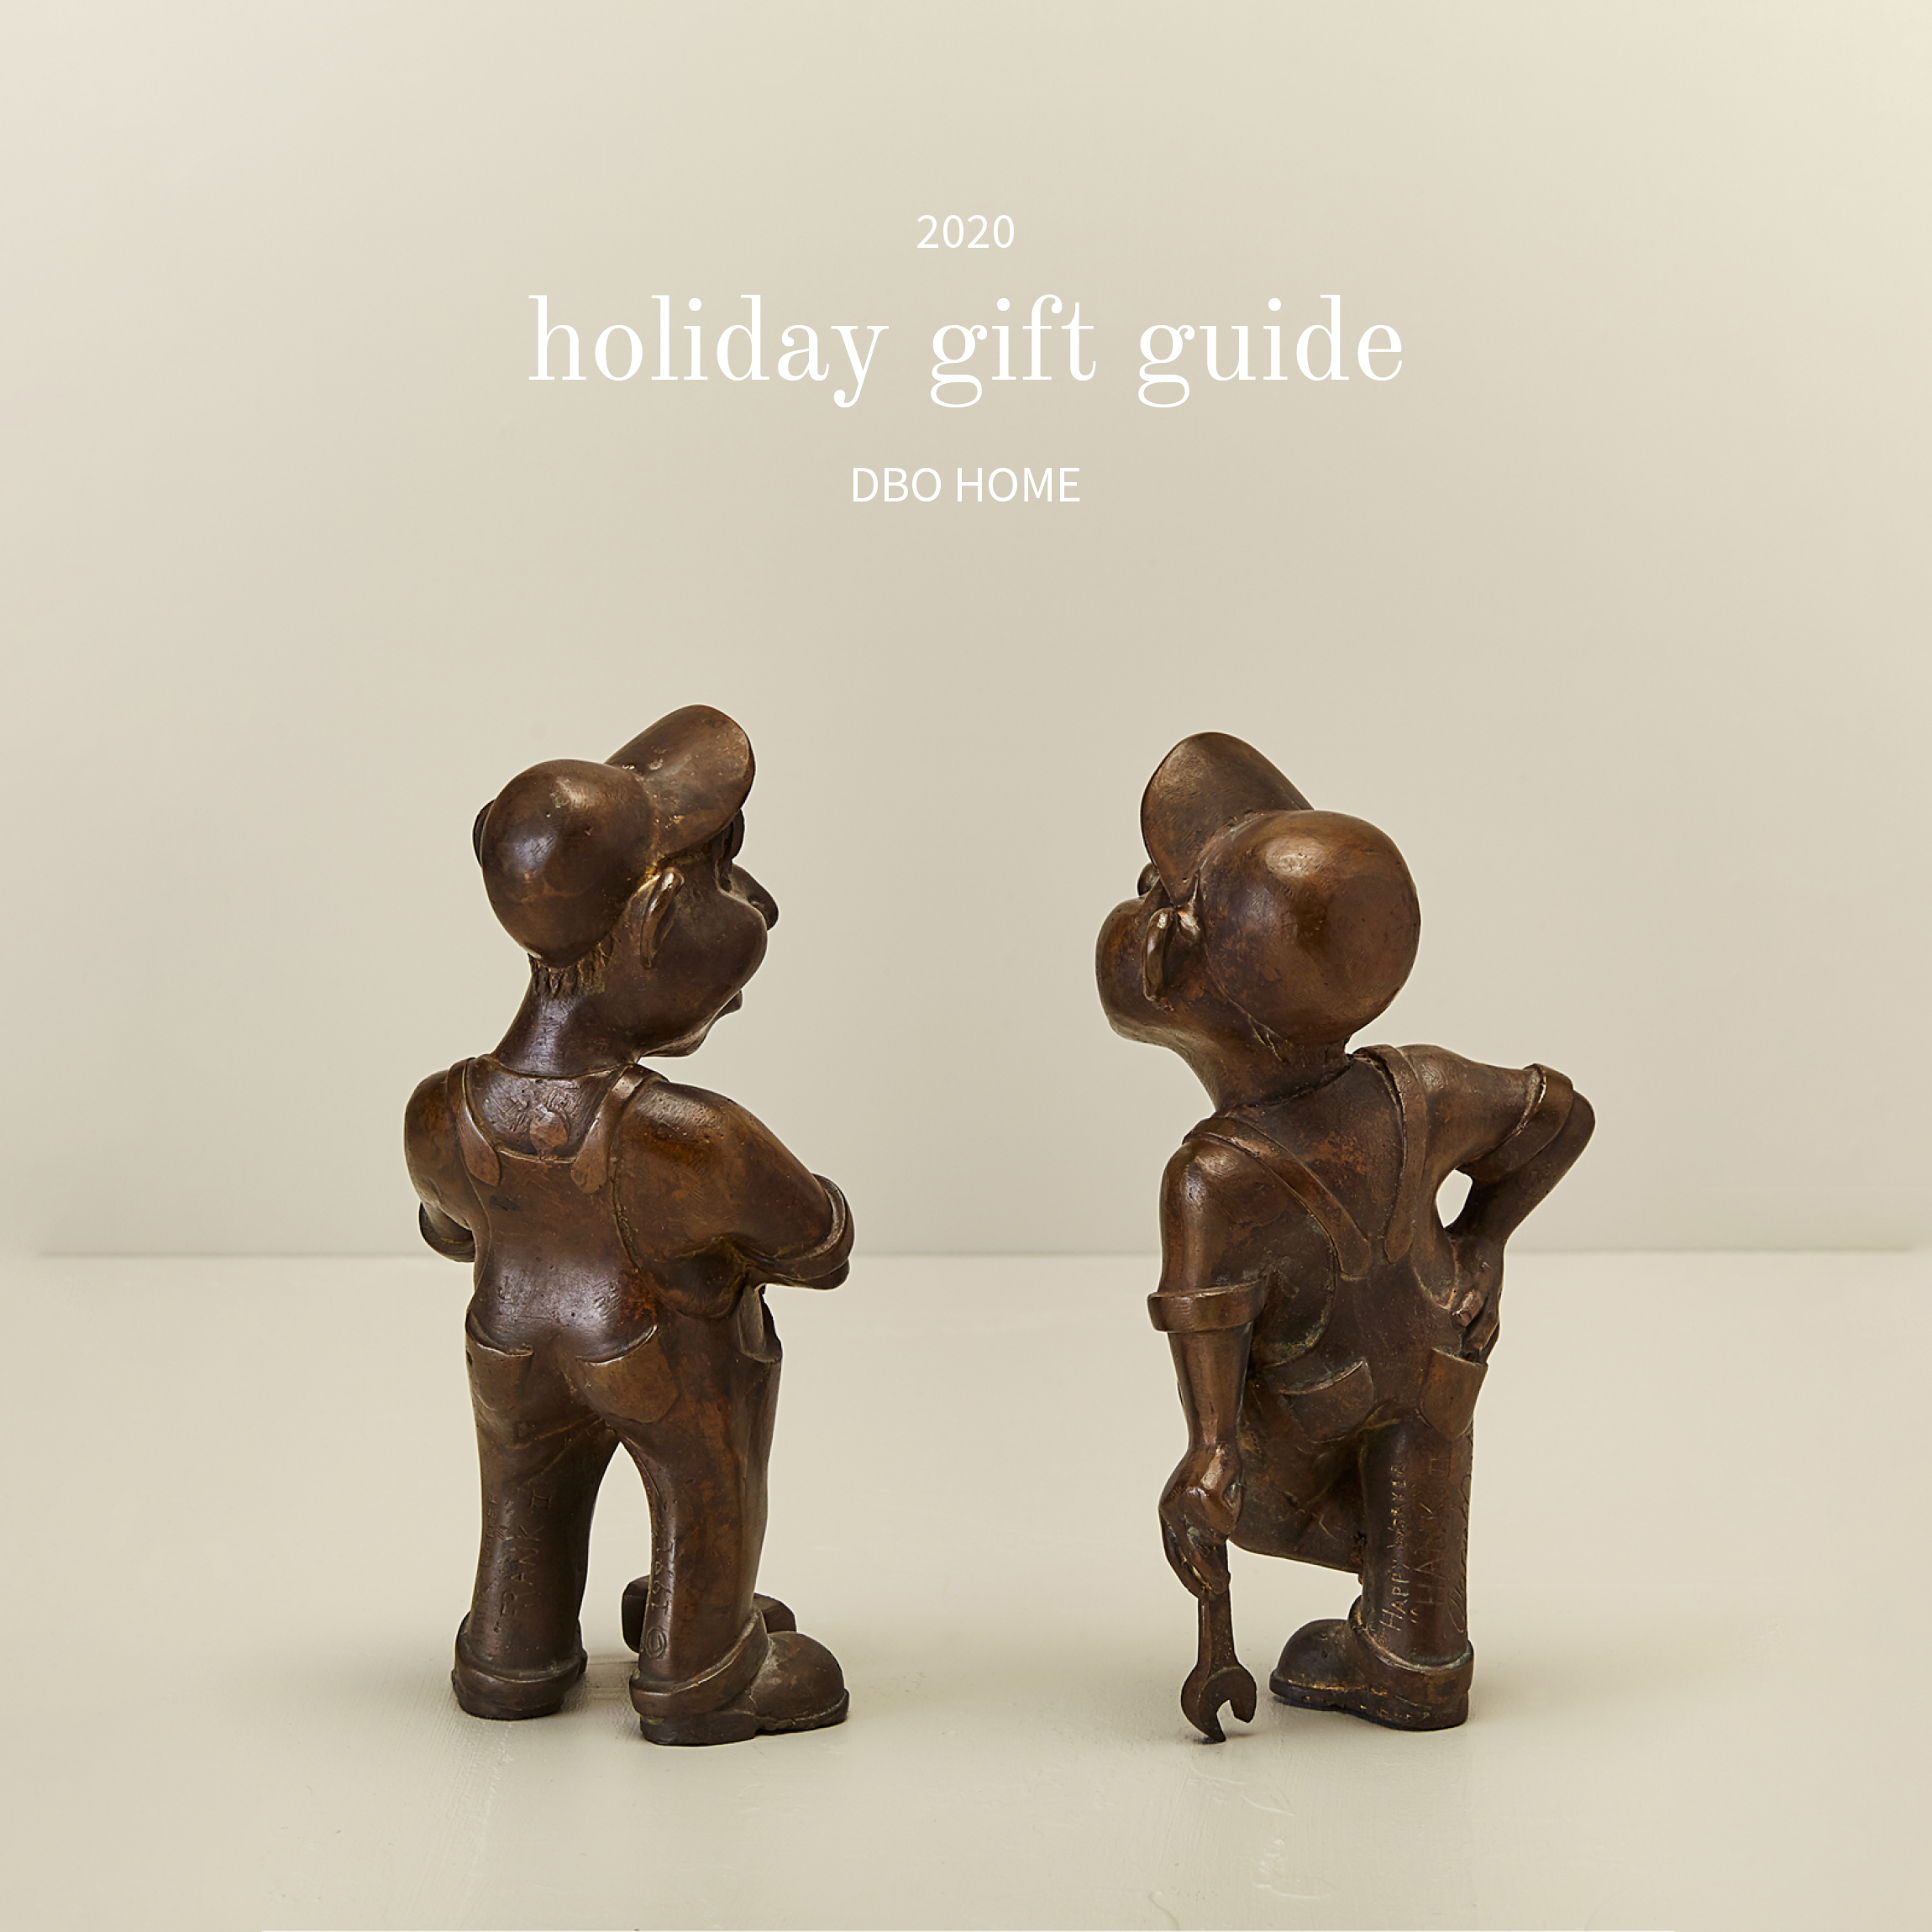 The DBO HOME Holiday 2020 Gift Guide